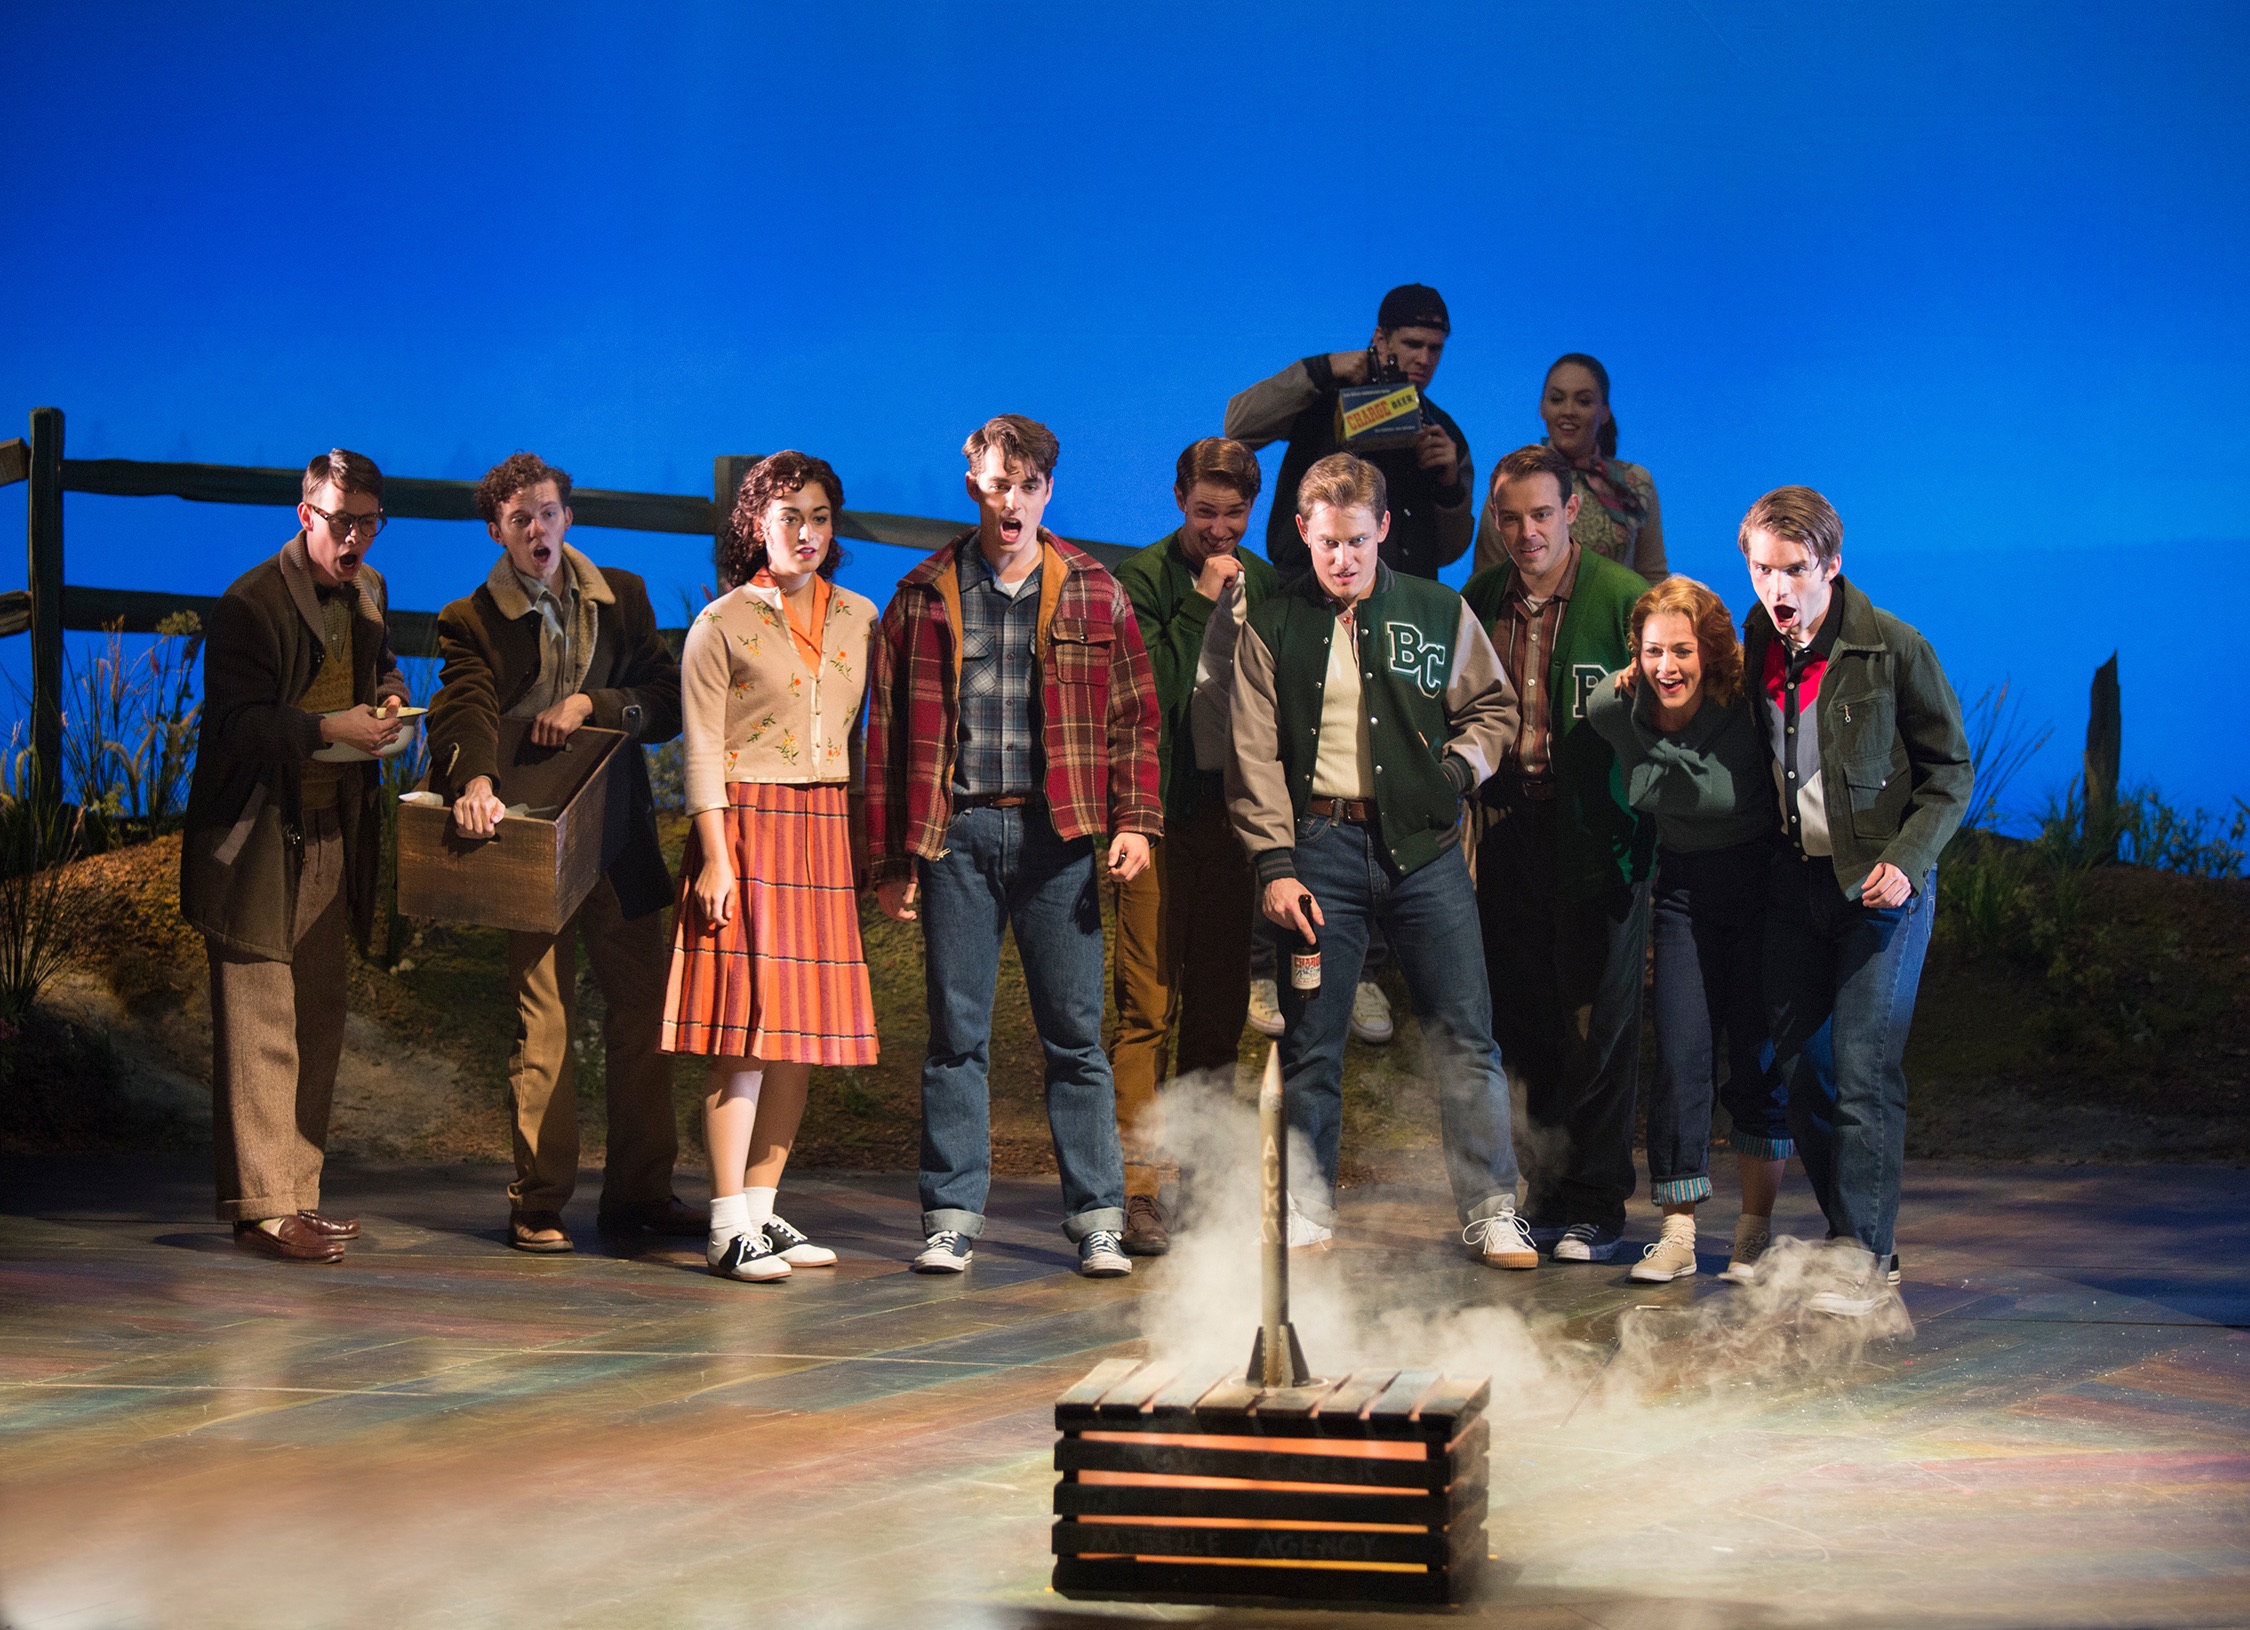 October Sky blasts off at The Old Globe - The Cougar Chronicle